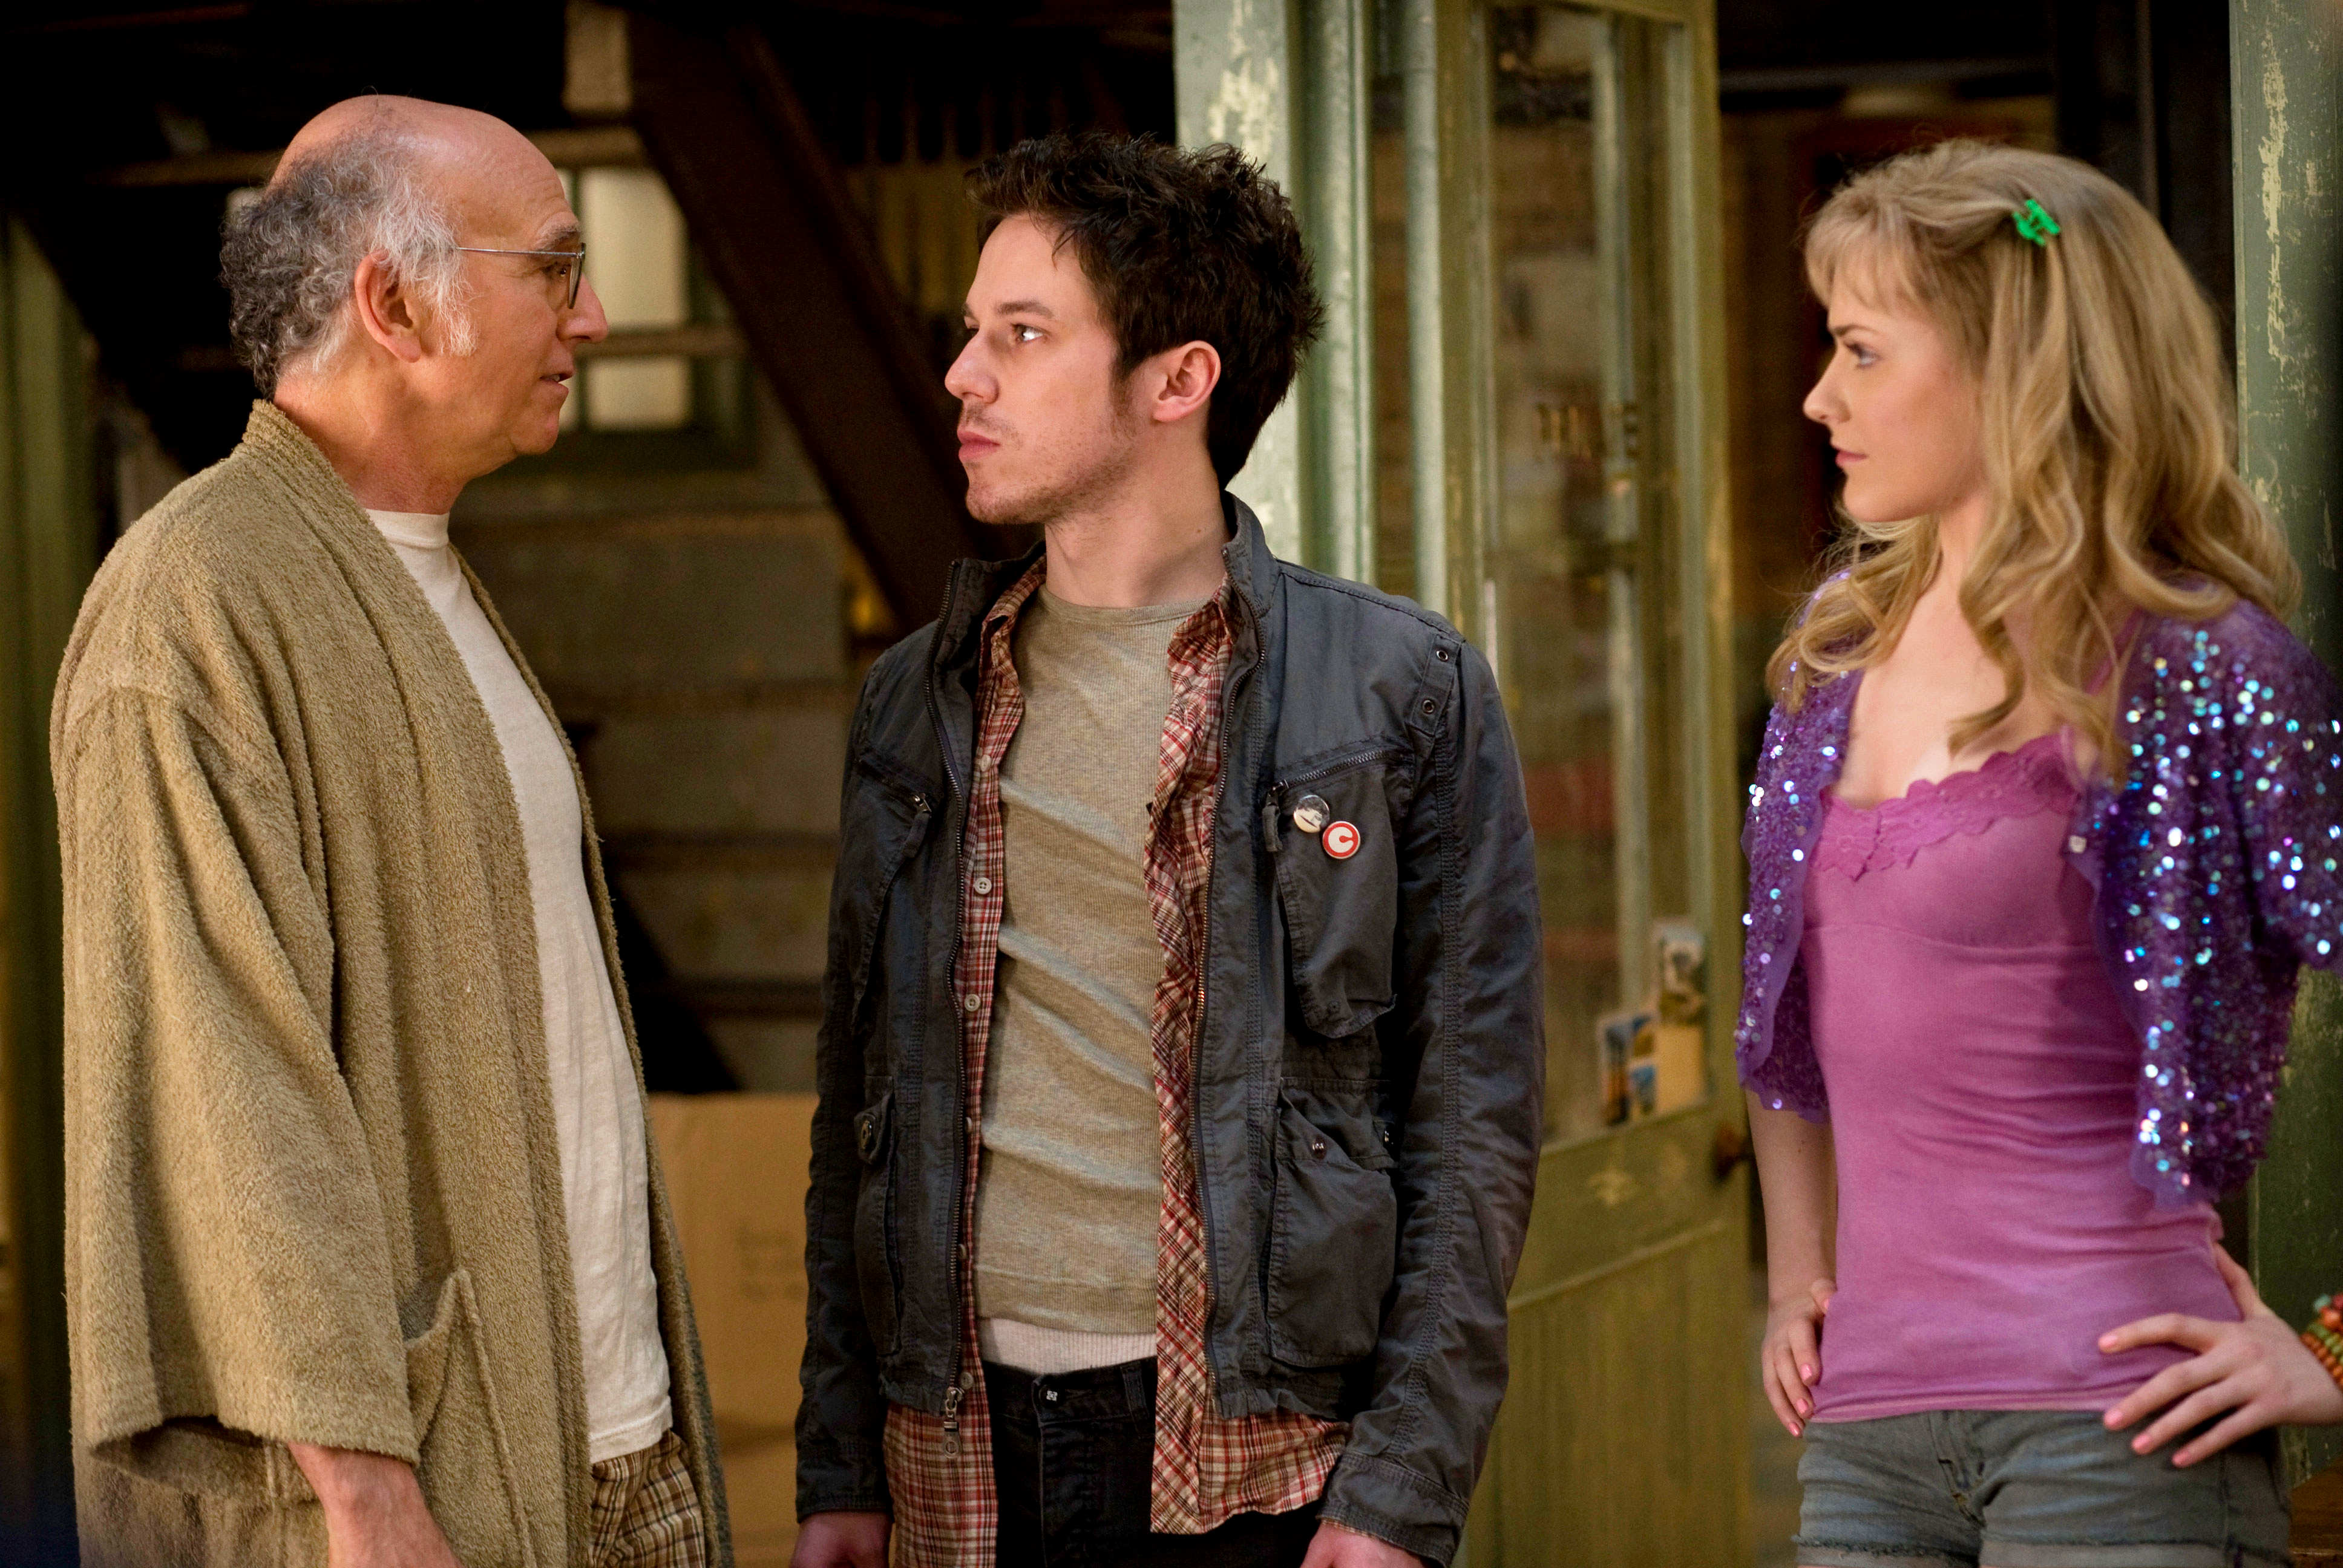 Larry David, John Gallagher Jr. and Evan Rachel Wood in Sony Pictures Classics' Whatever Works (2009). Photo credit by Jessica Miglio.